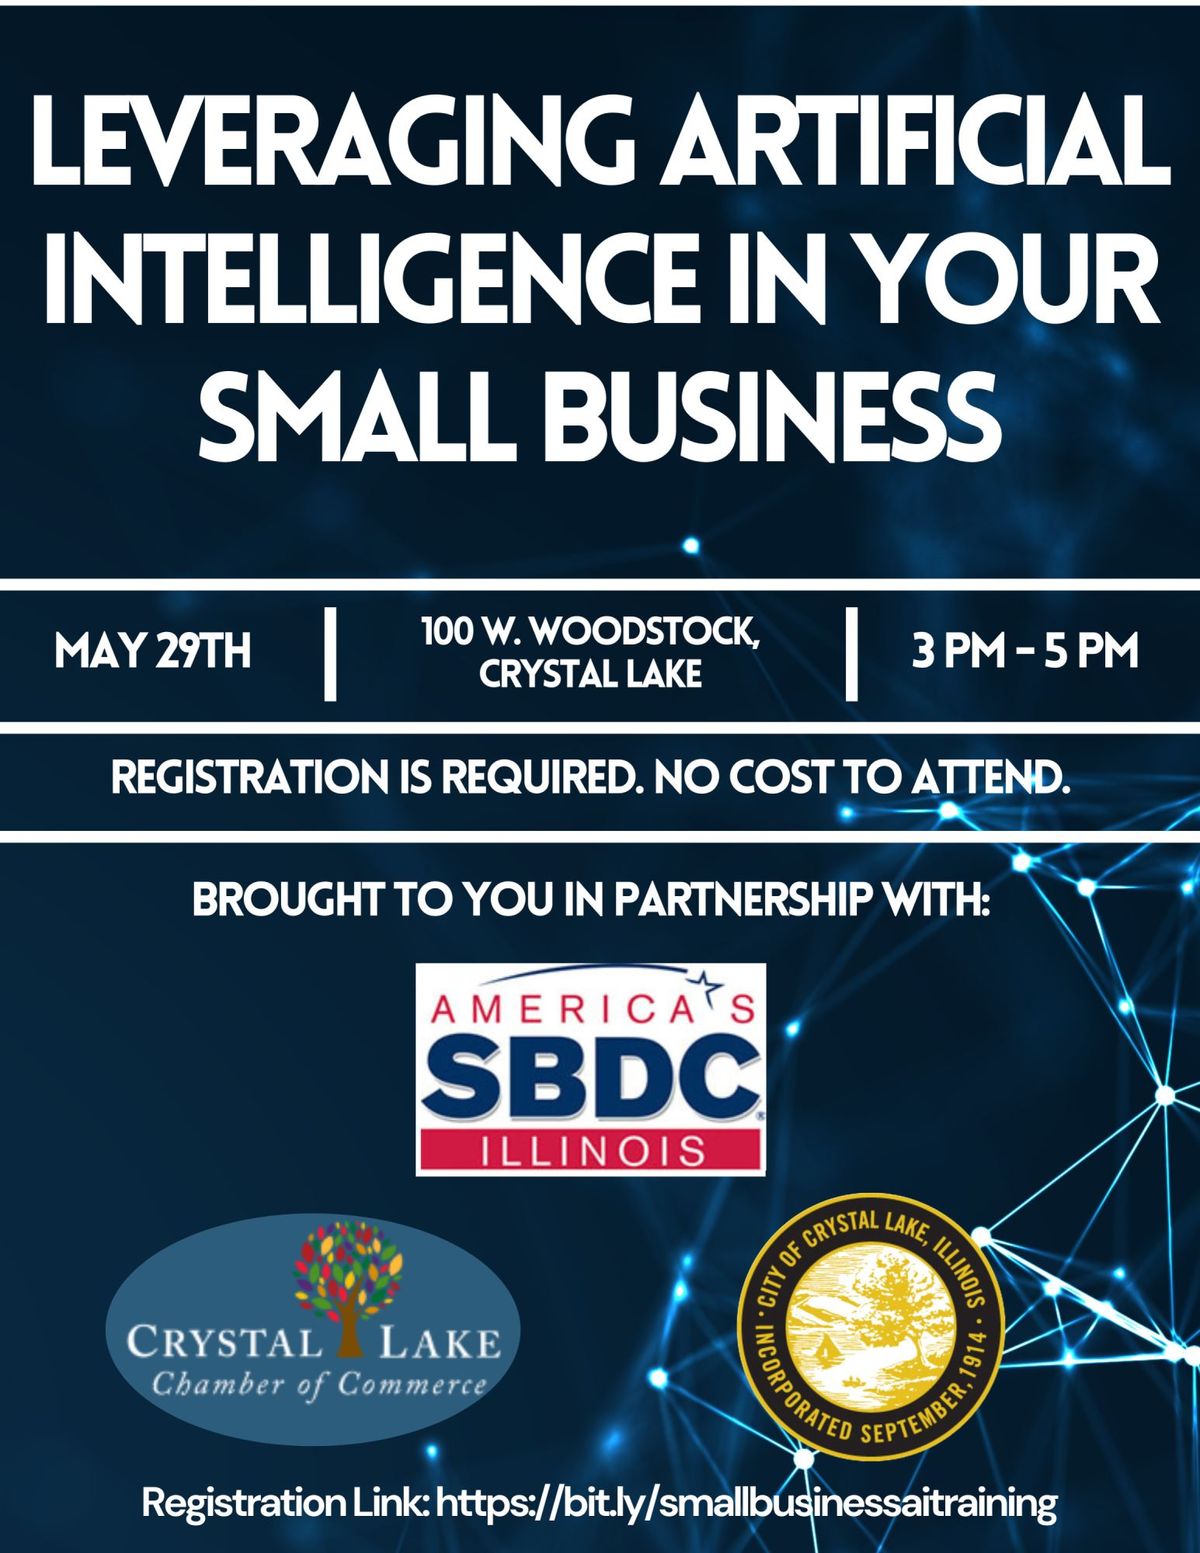 Leveraging Artificial Intelligence in Your Small Business Seminar